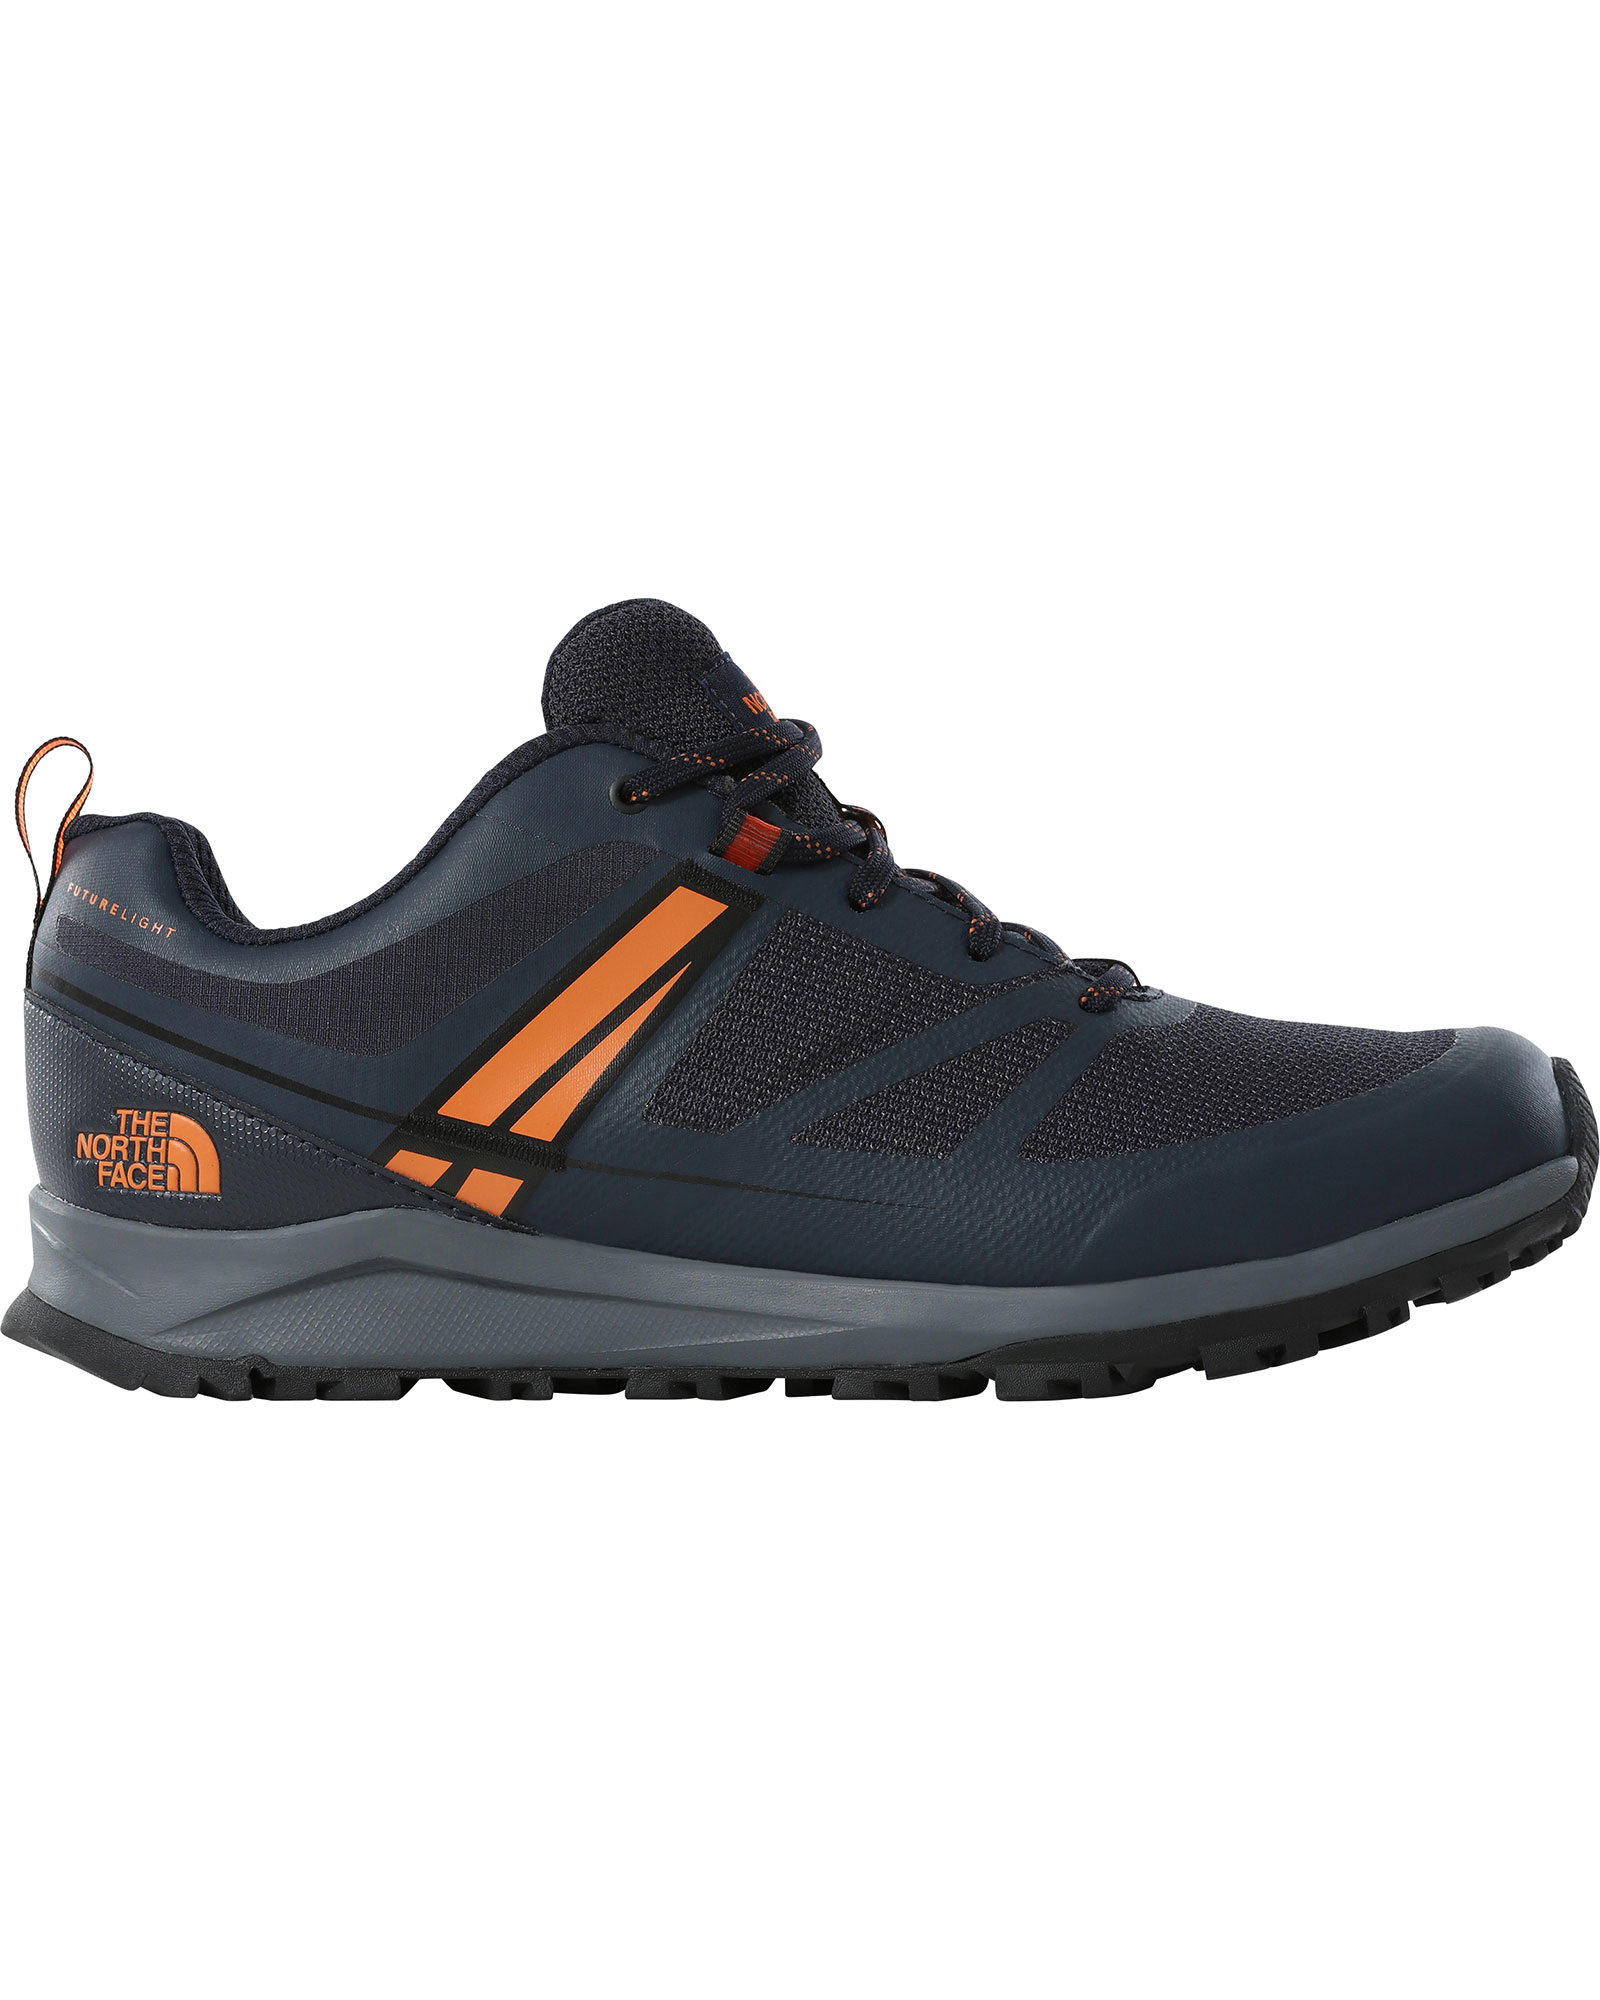 The North Face Litewave Futurelight Mens Shoes